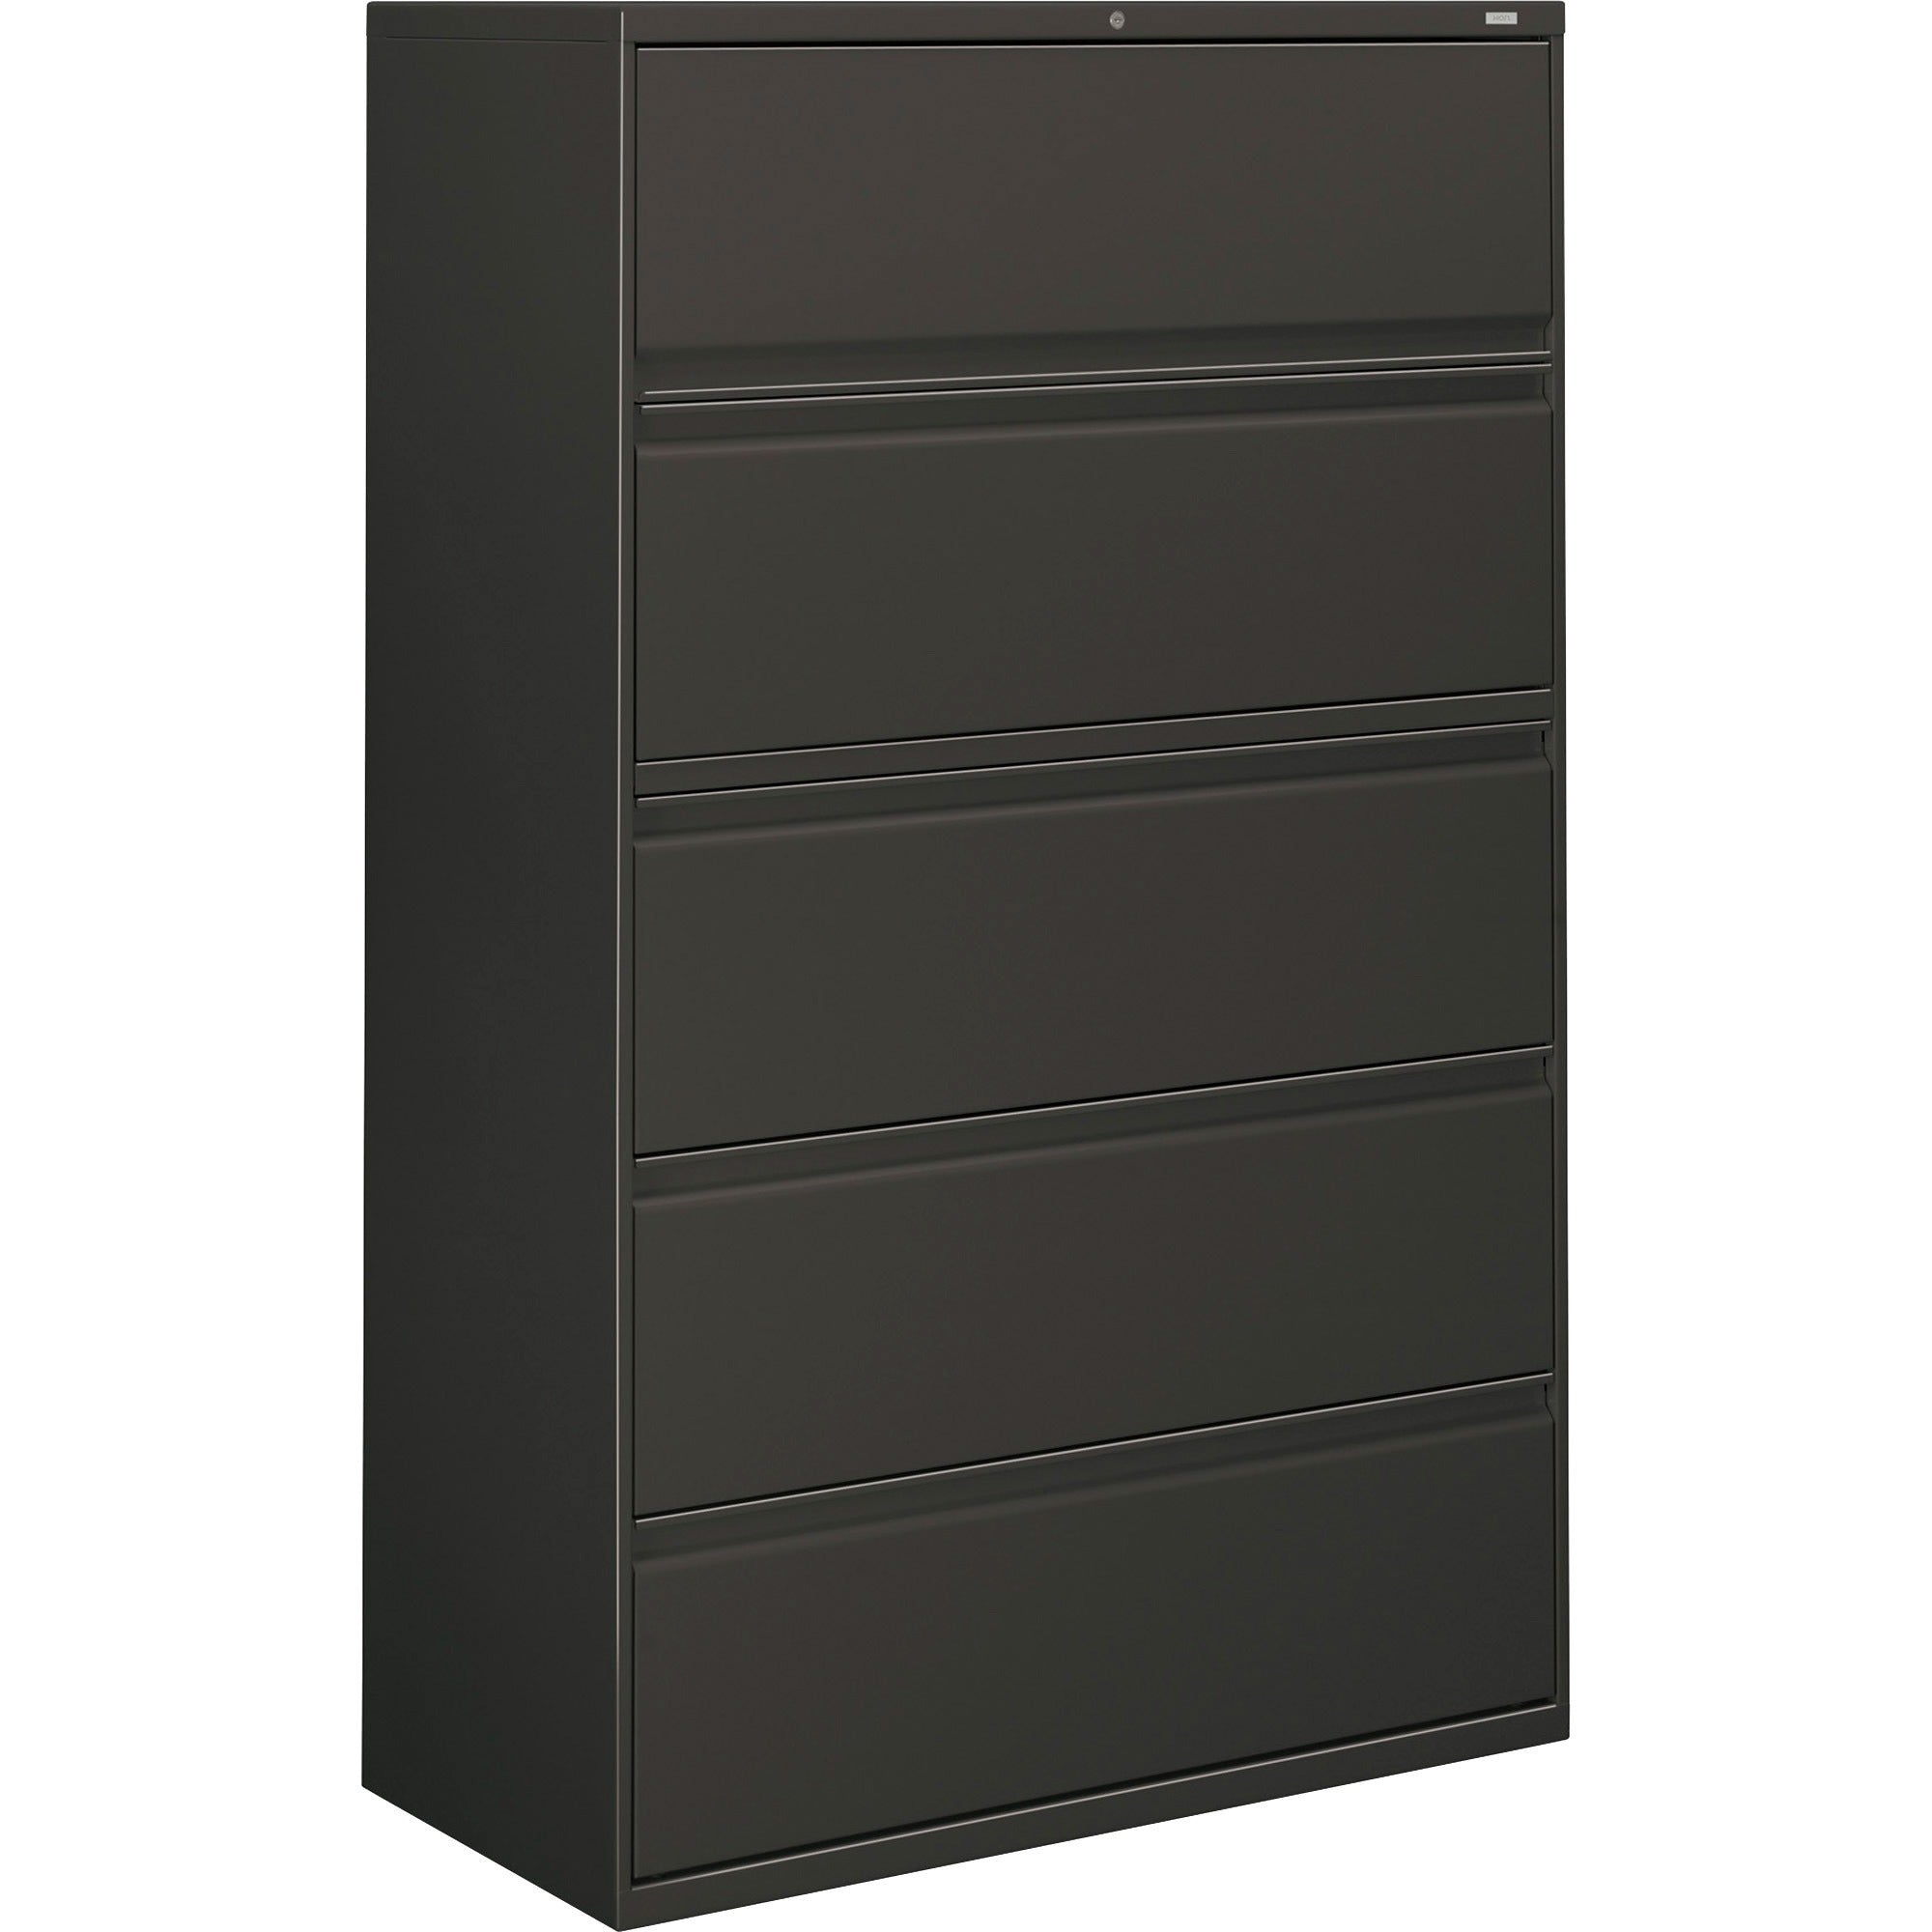 HON Brigade 800 Series 5-Drawer Lateral - 42" x 18" x 64.3" - 2 x Shelf(ves) - 5 x Drawer(s) for File - A4, Legal, Letter - Lateral - Interlocking, Durable, Leveling Glide, Recessed Handle, Ball-bearing Suspension - Charcoal - Baked Enamel - Steel - - 